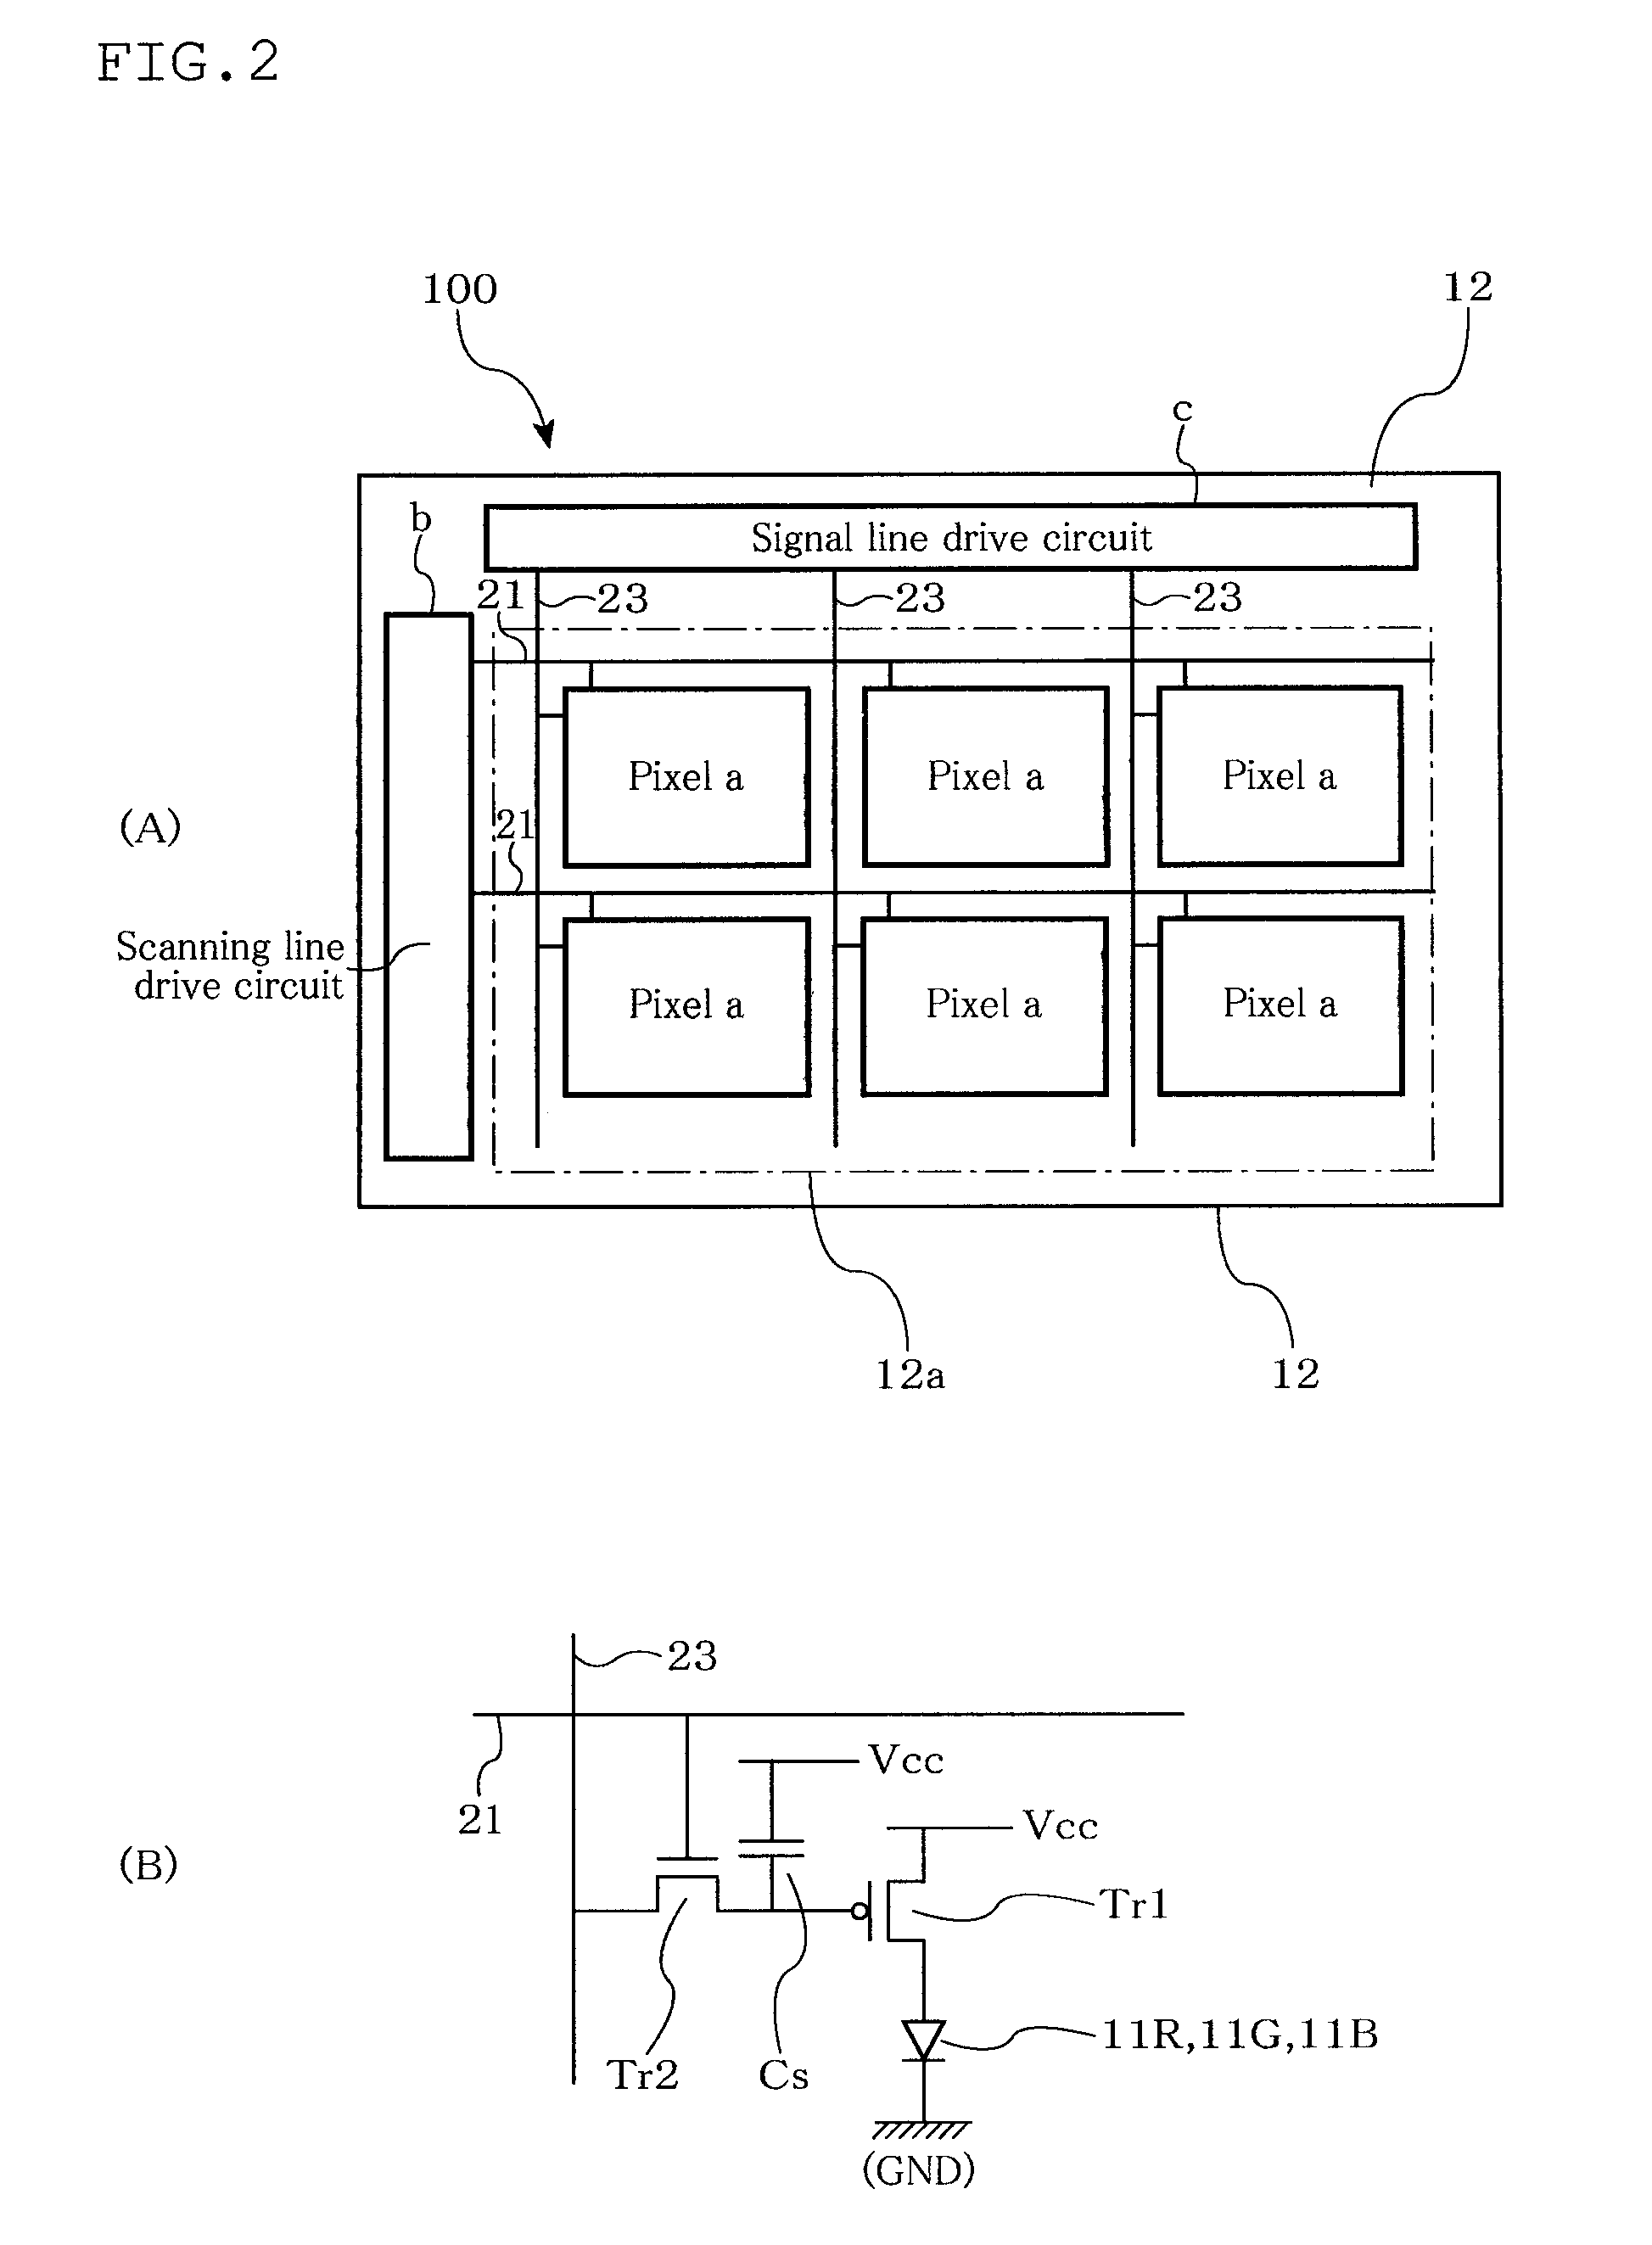 Material for organic electroluminescent device, organic electroluminescent device, and organic electroluminescent display